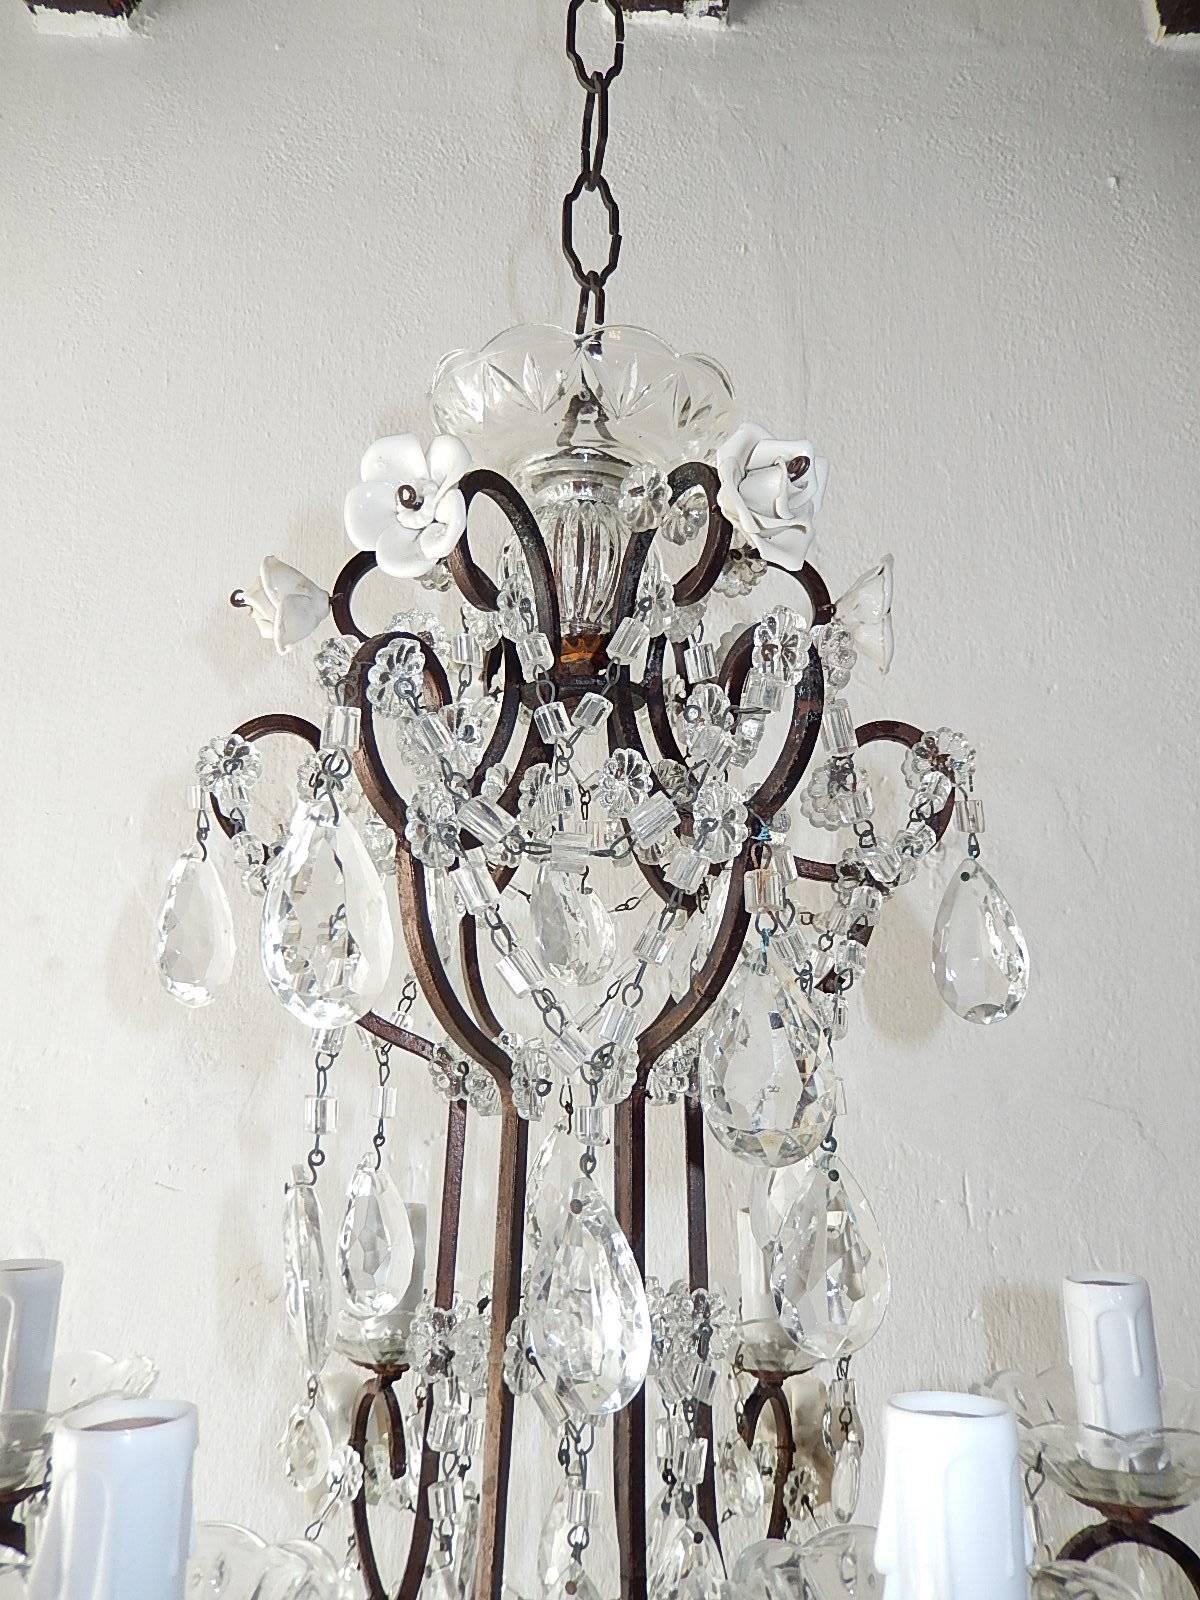 1920 French Elegant Crystal Prisms and Swags with White Roses Chandelier 7